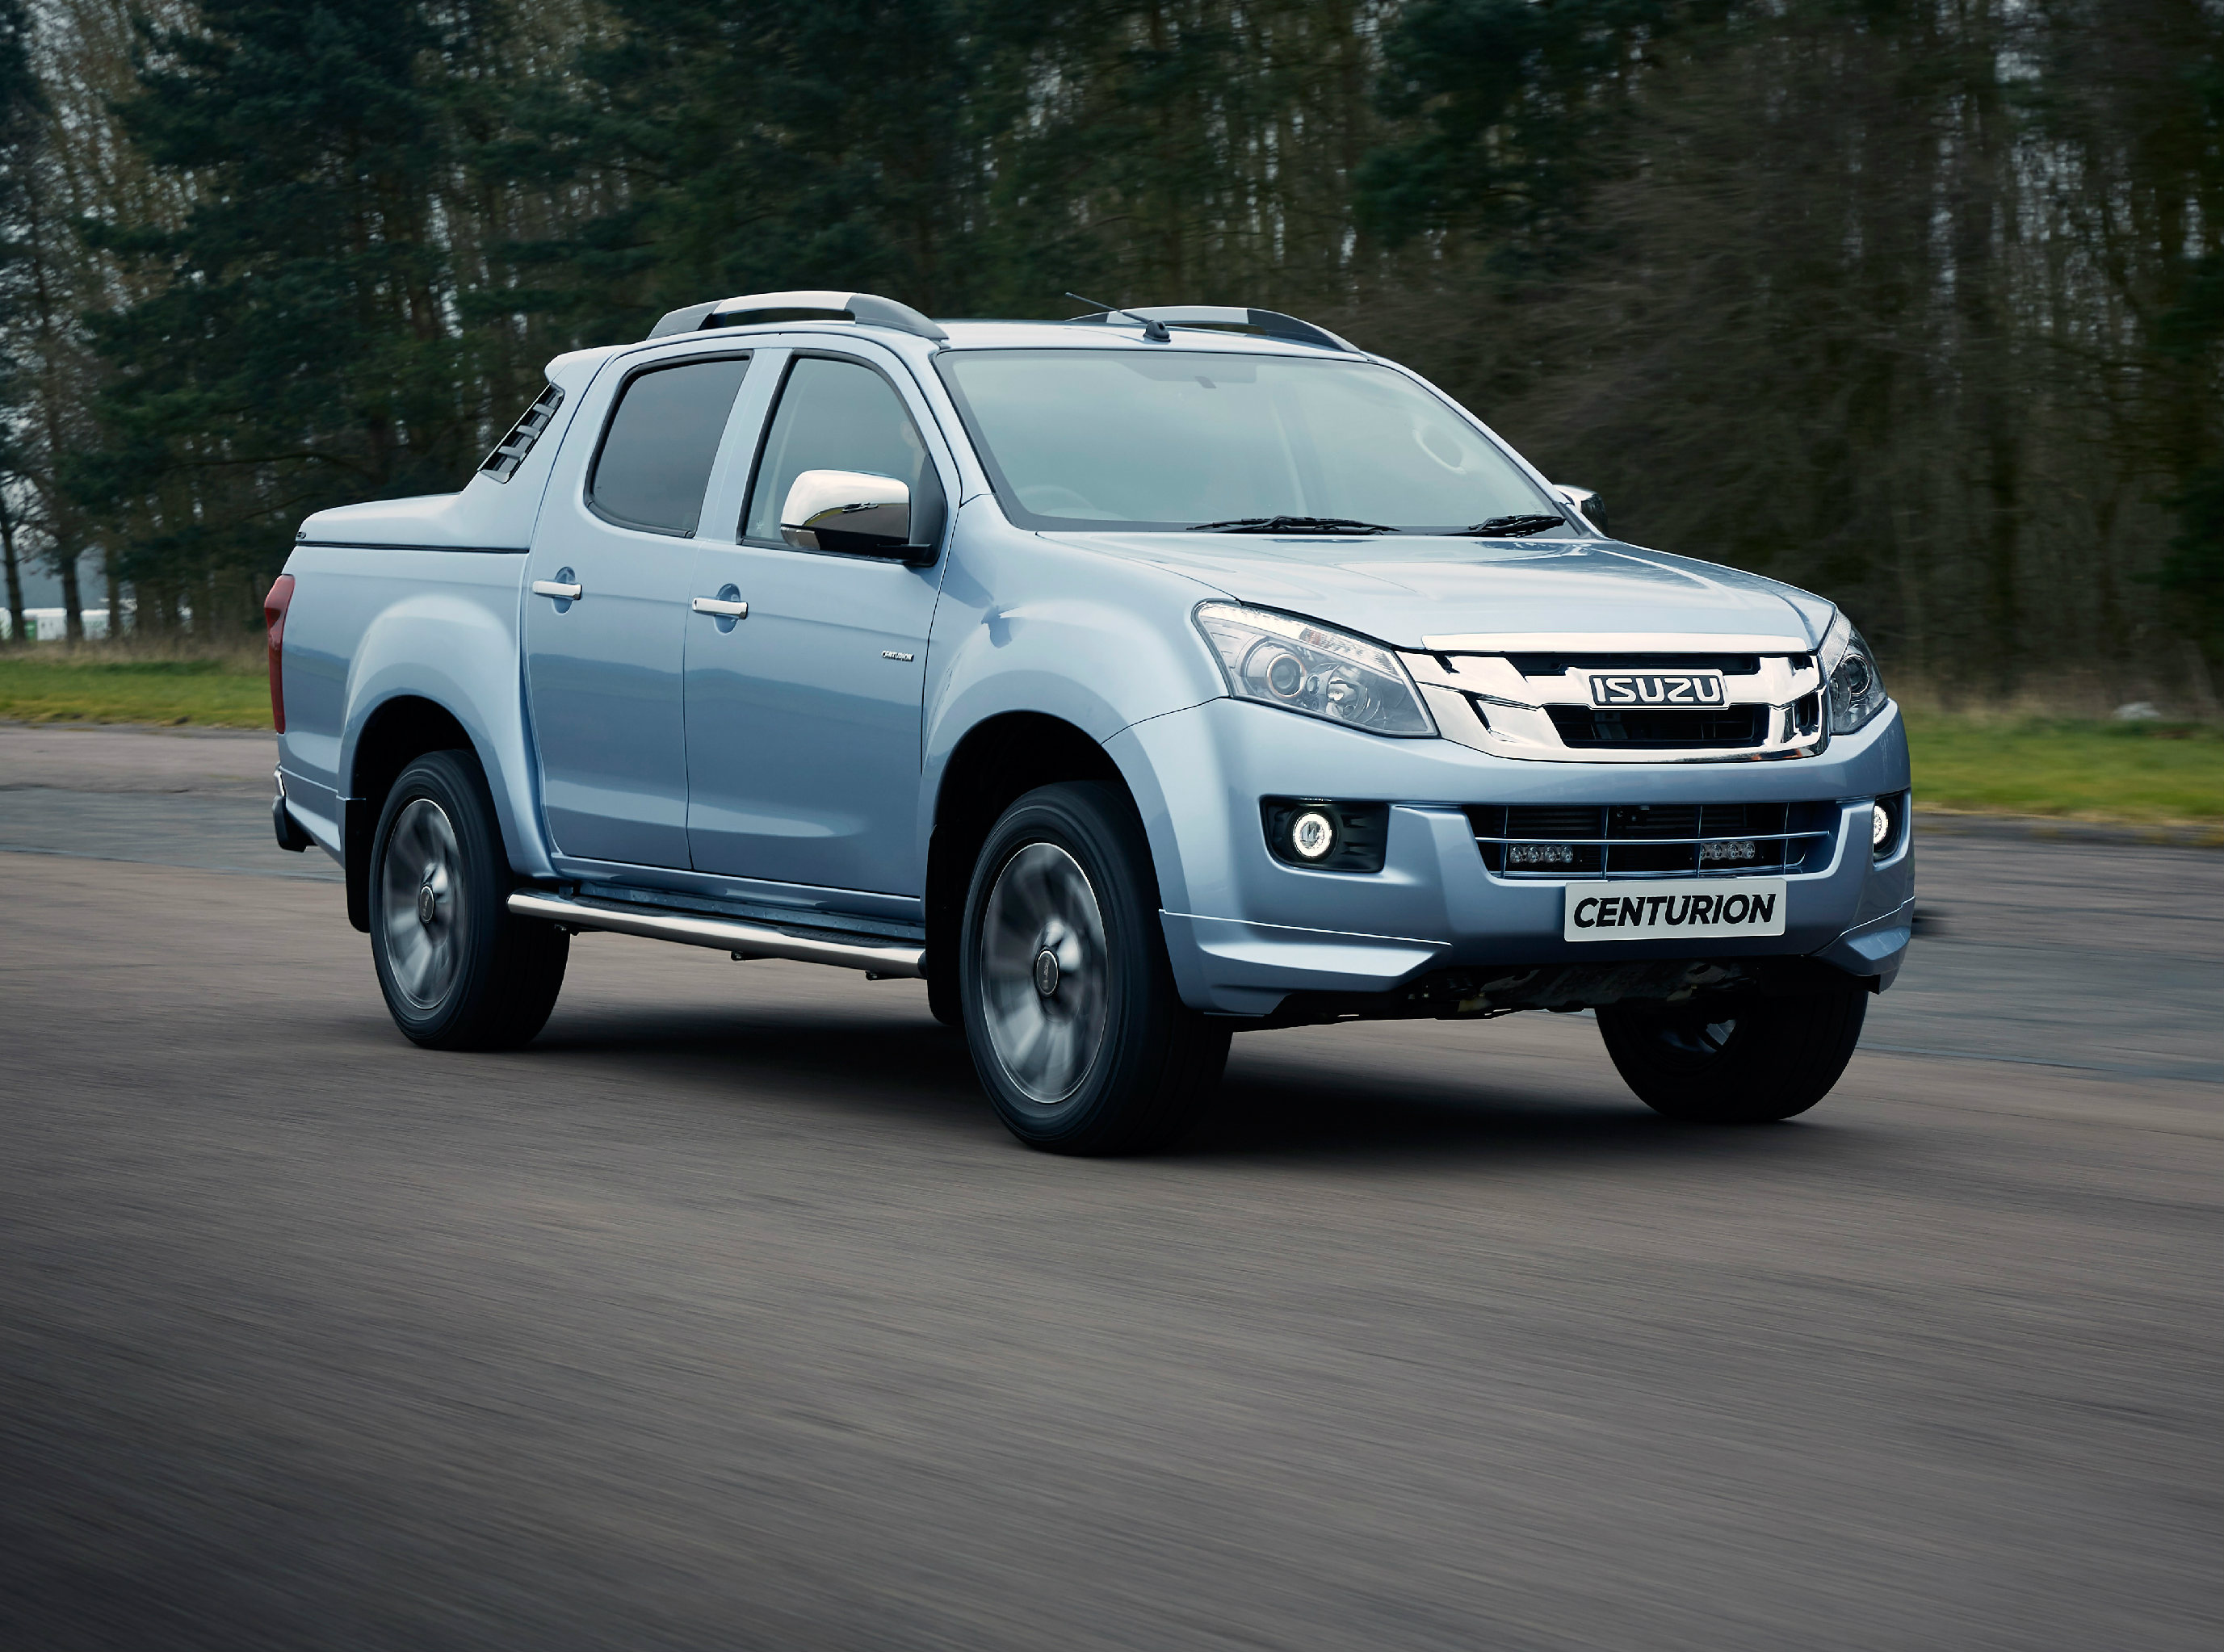 Pick up trucks: which are the best for towing, fuel economy and families?